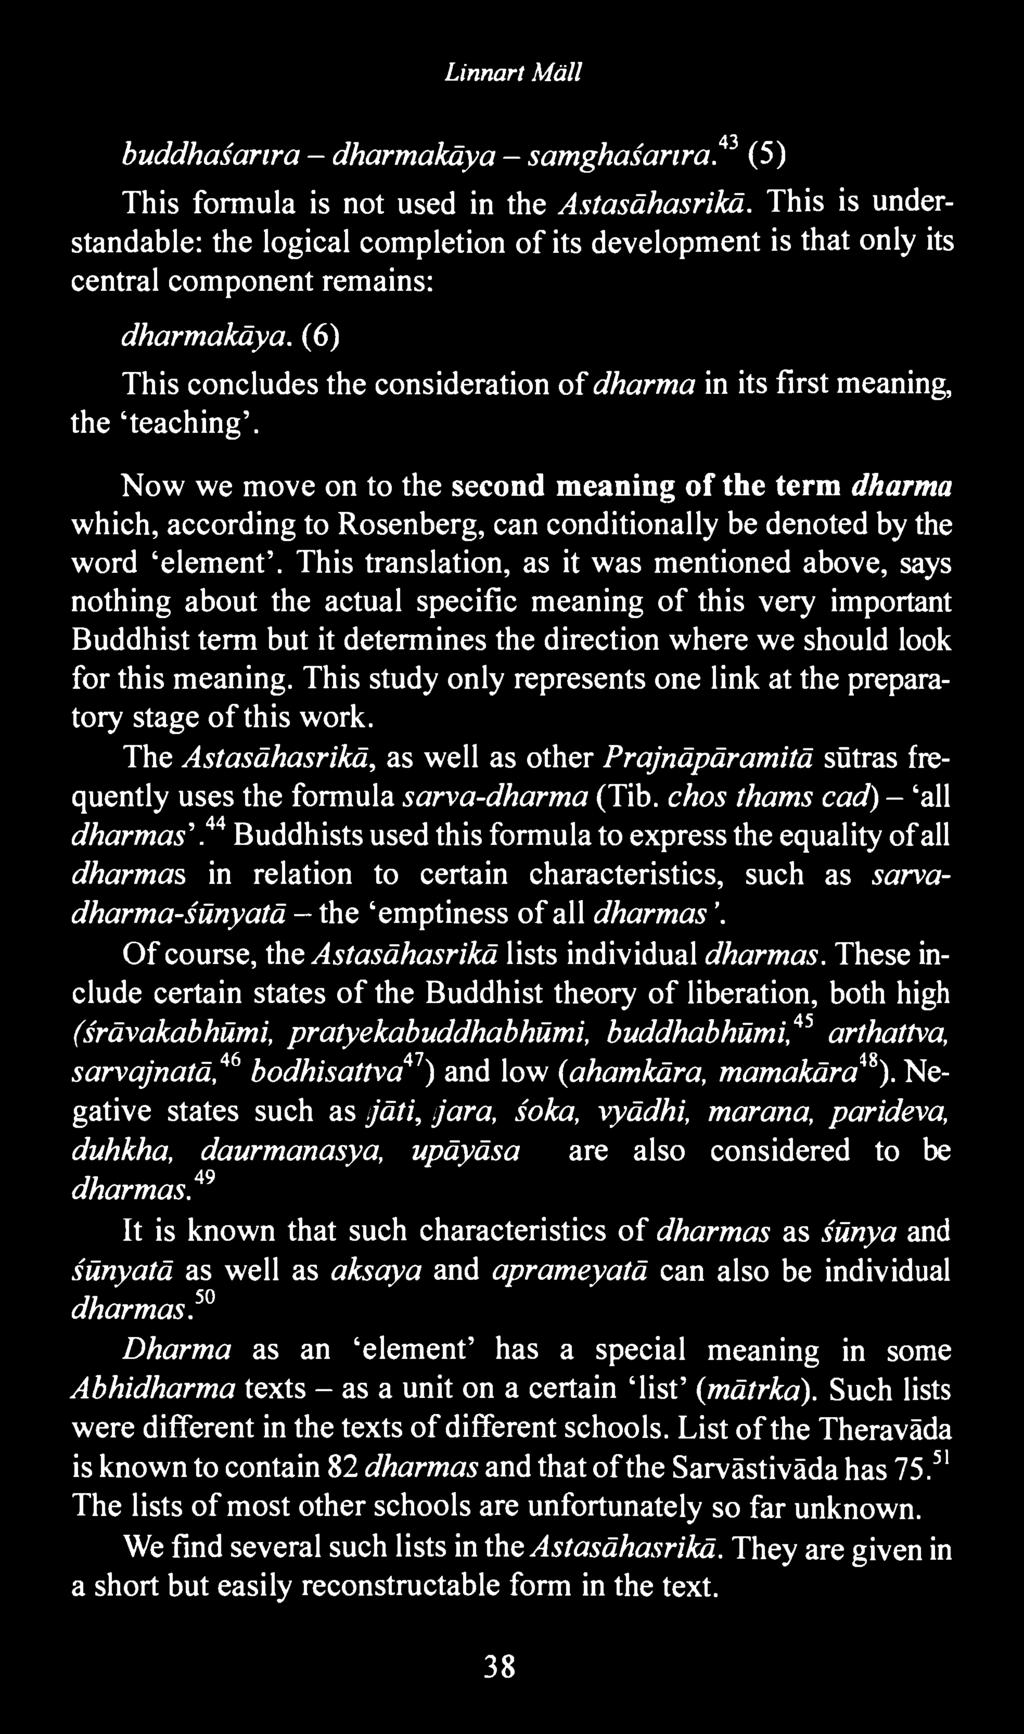 (6) This concludes the consideration of dharma in its first meaning, the 'teaching'.